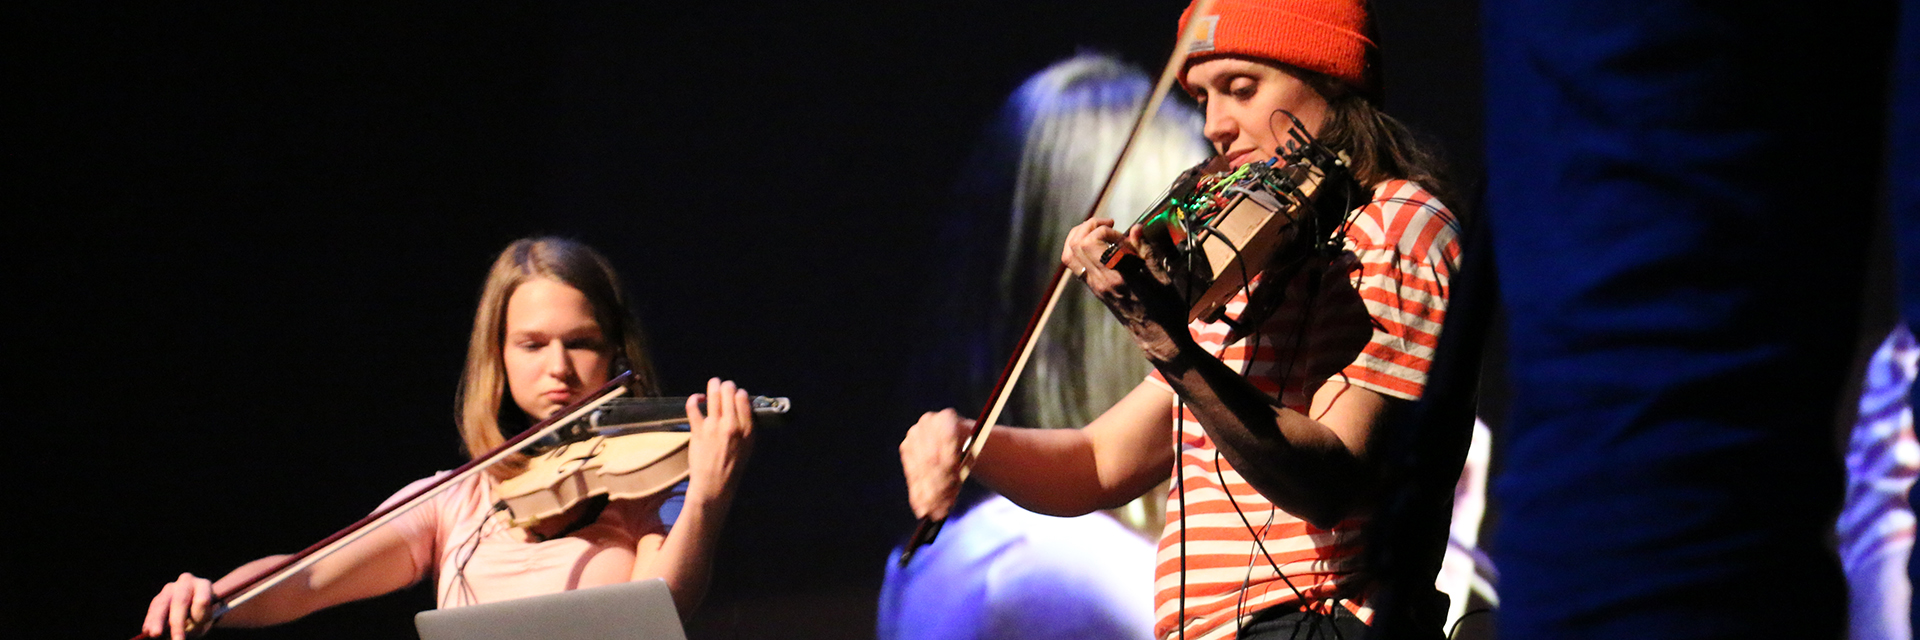 A girl playing a violin on stage next to a woman playing a modified violin with a circuit board on top.